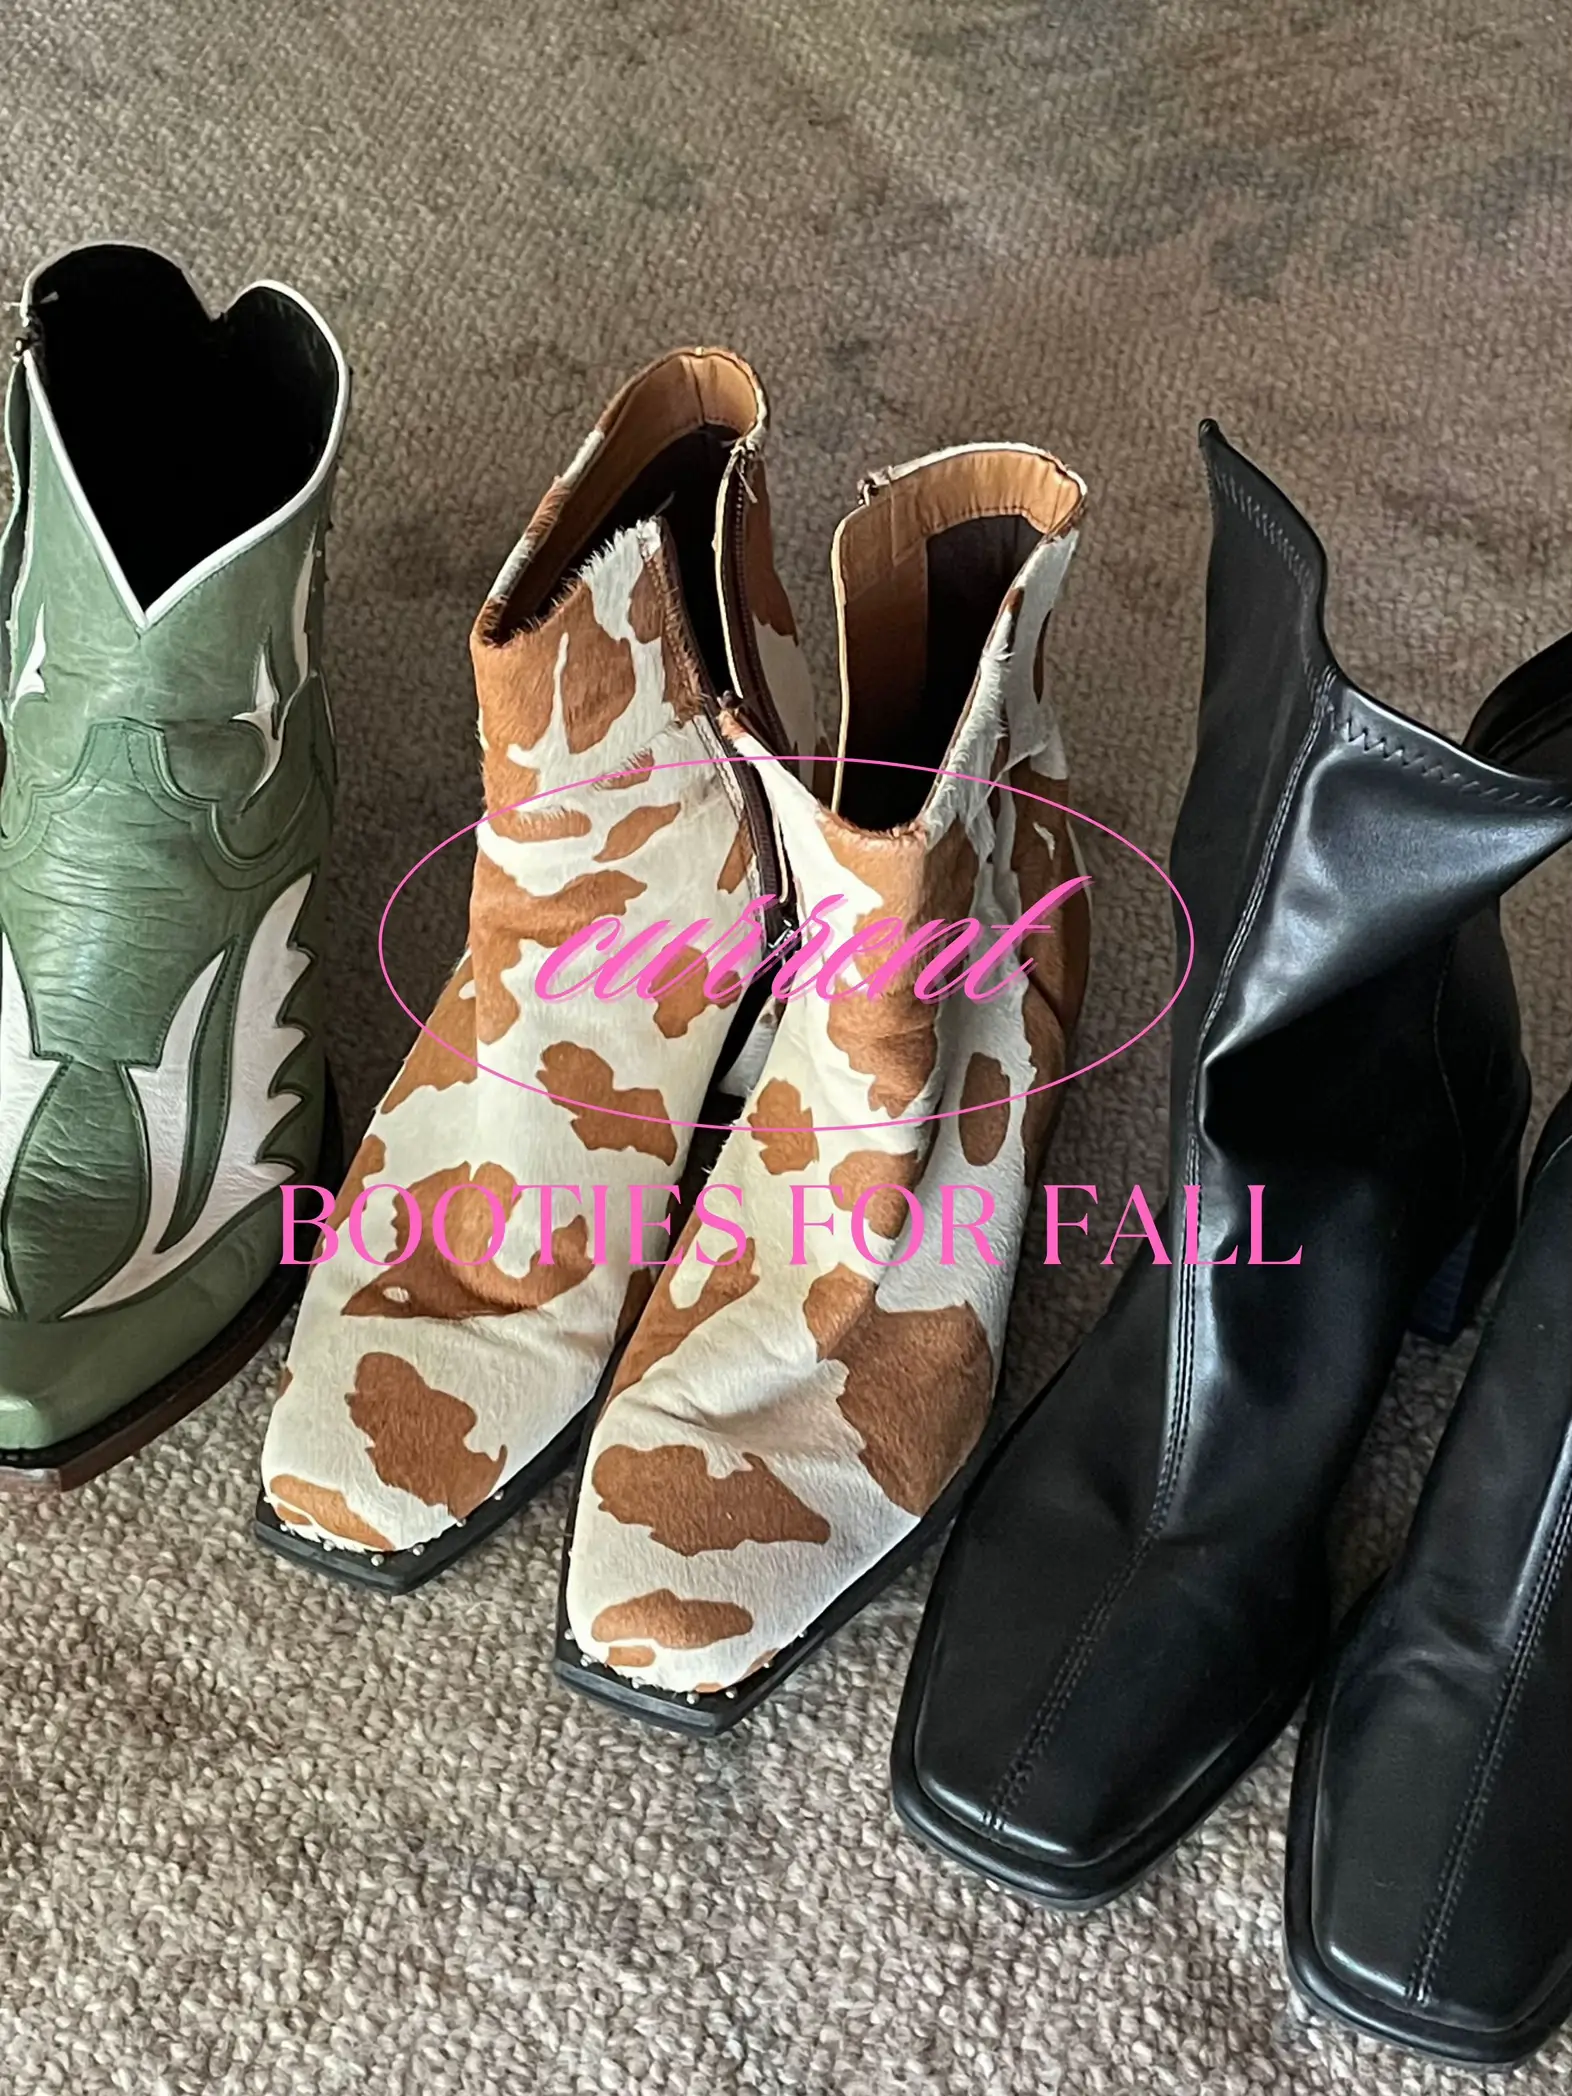 Products by Louis Vuitton: Fireball Ankle Boot